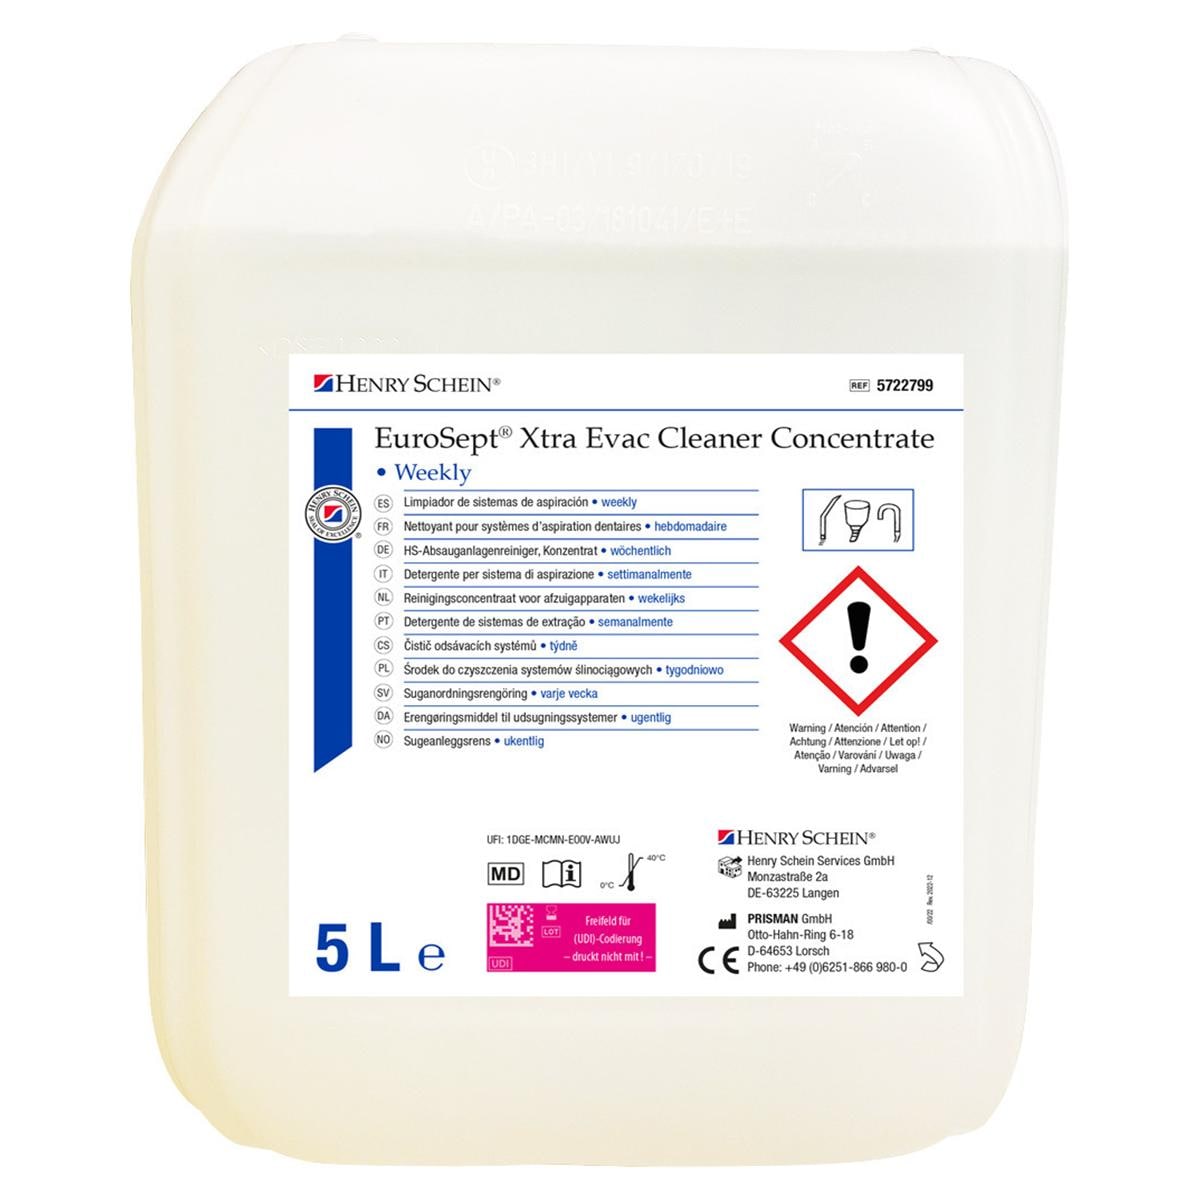 EuroSept Xtra Evac Cleaner Concentrate Weekly - Can, 5 liter